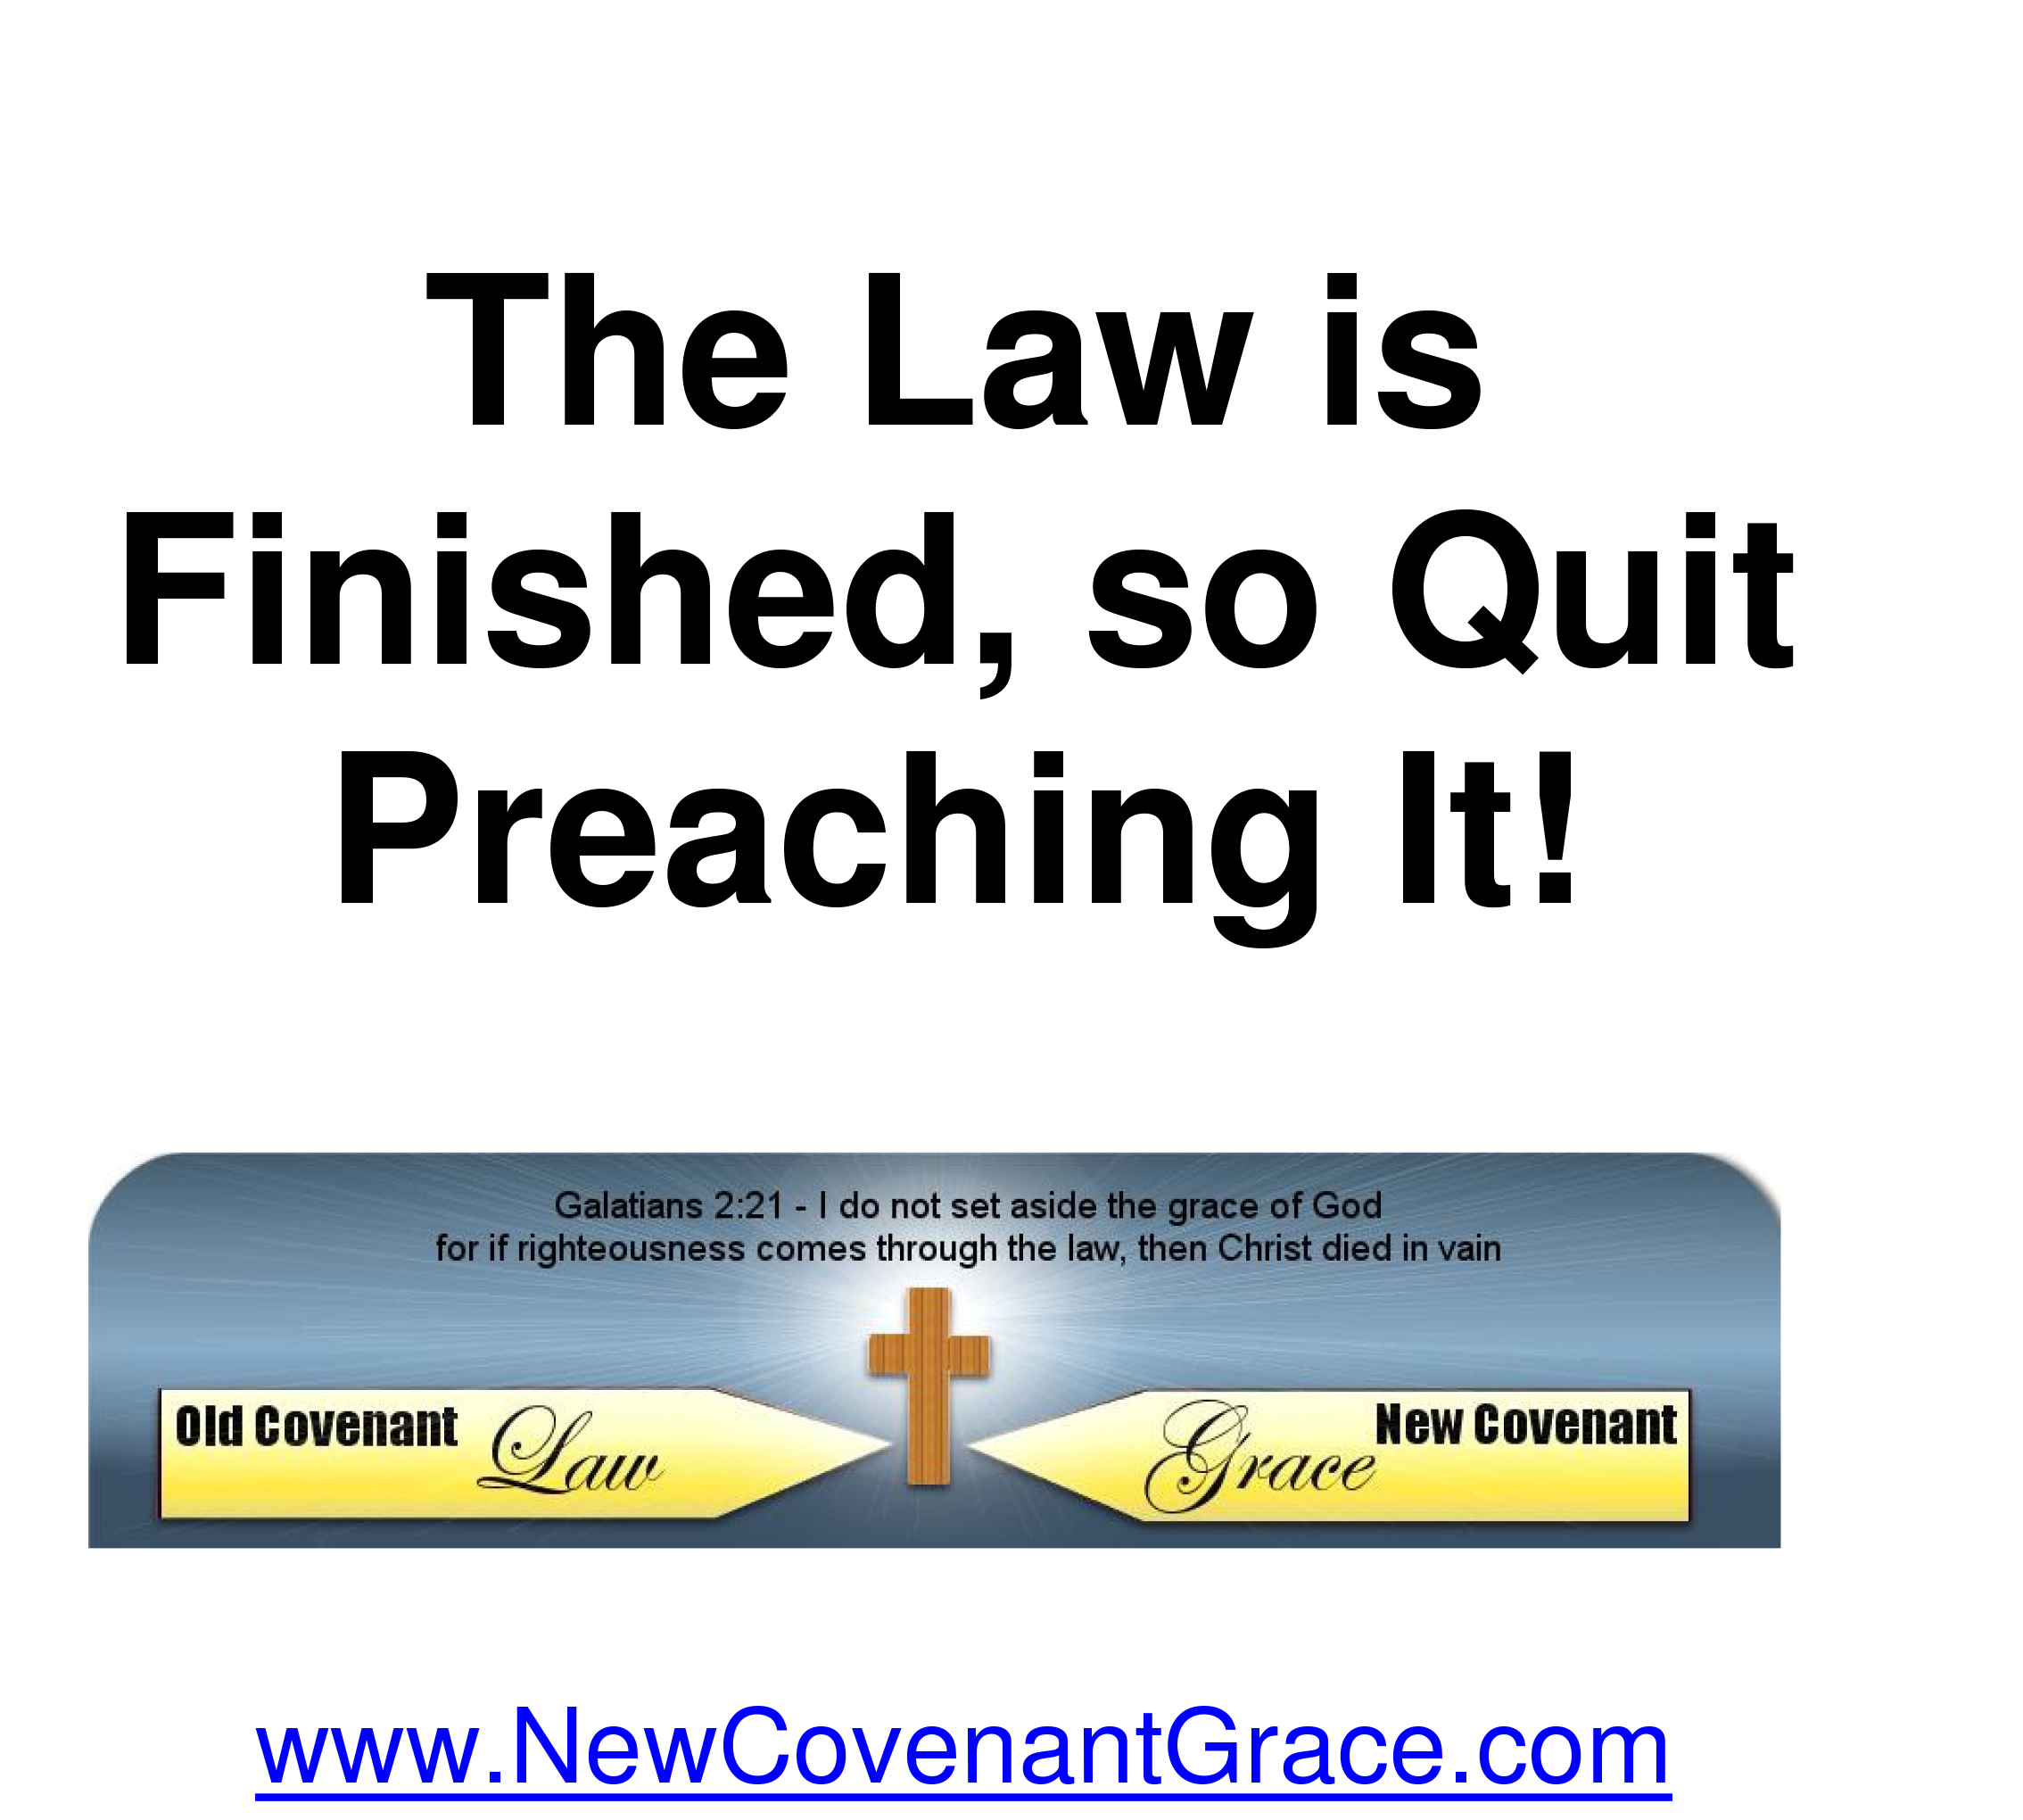 The Law is finished, So Quit Preaching It! (e-book)